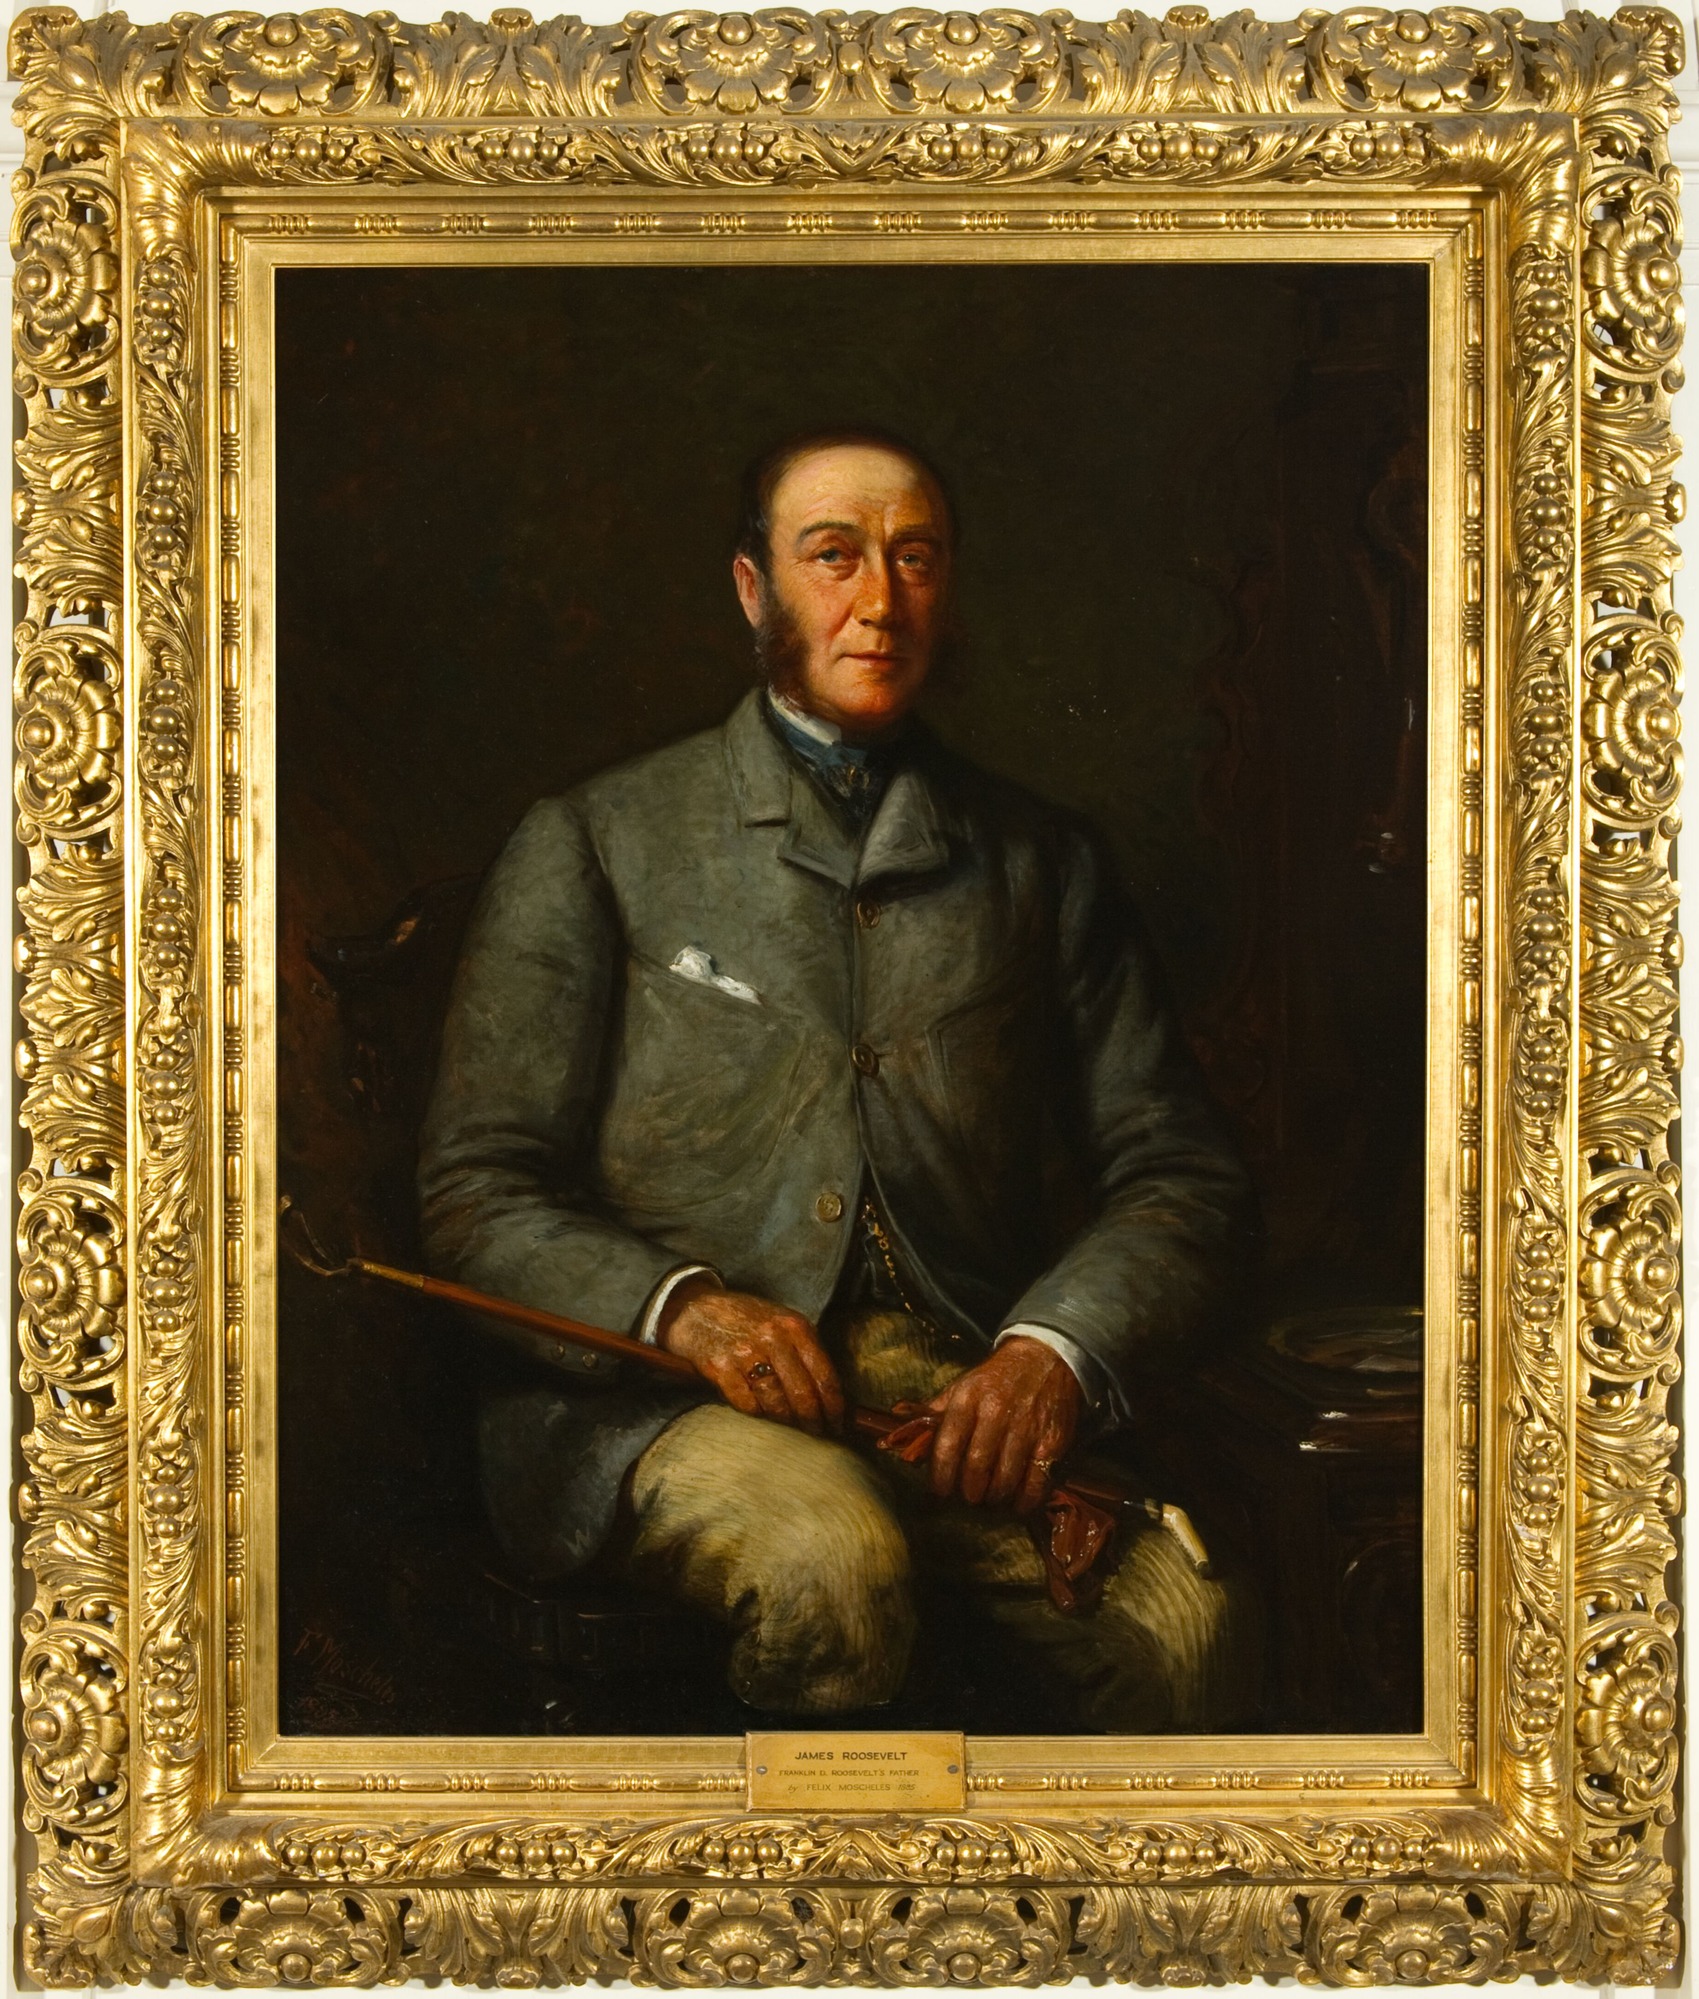 A painted portrait of a seated gentleman holding a can and leather gloves.